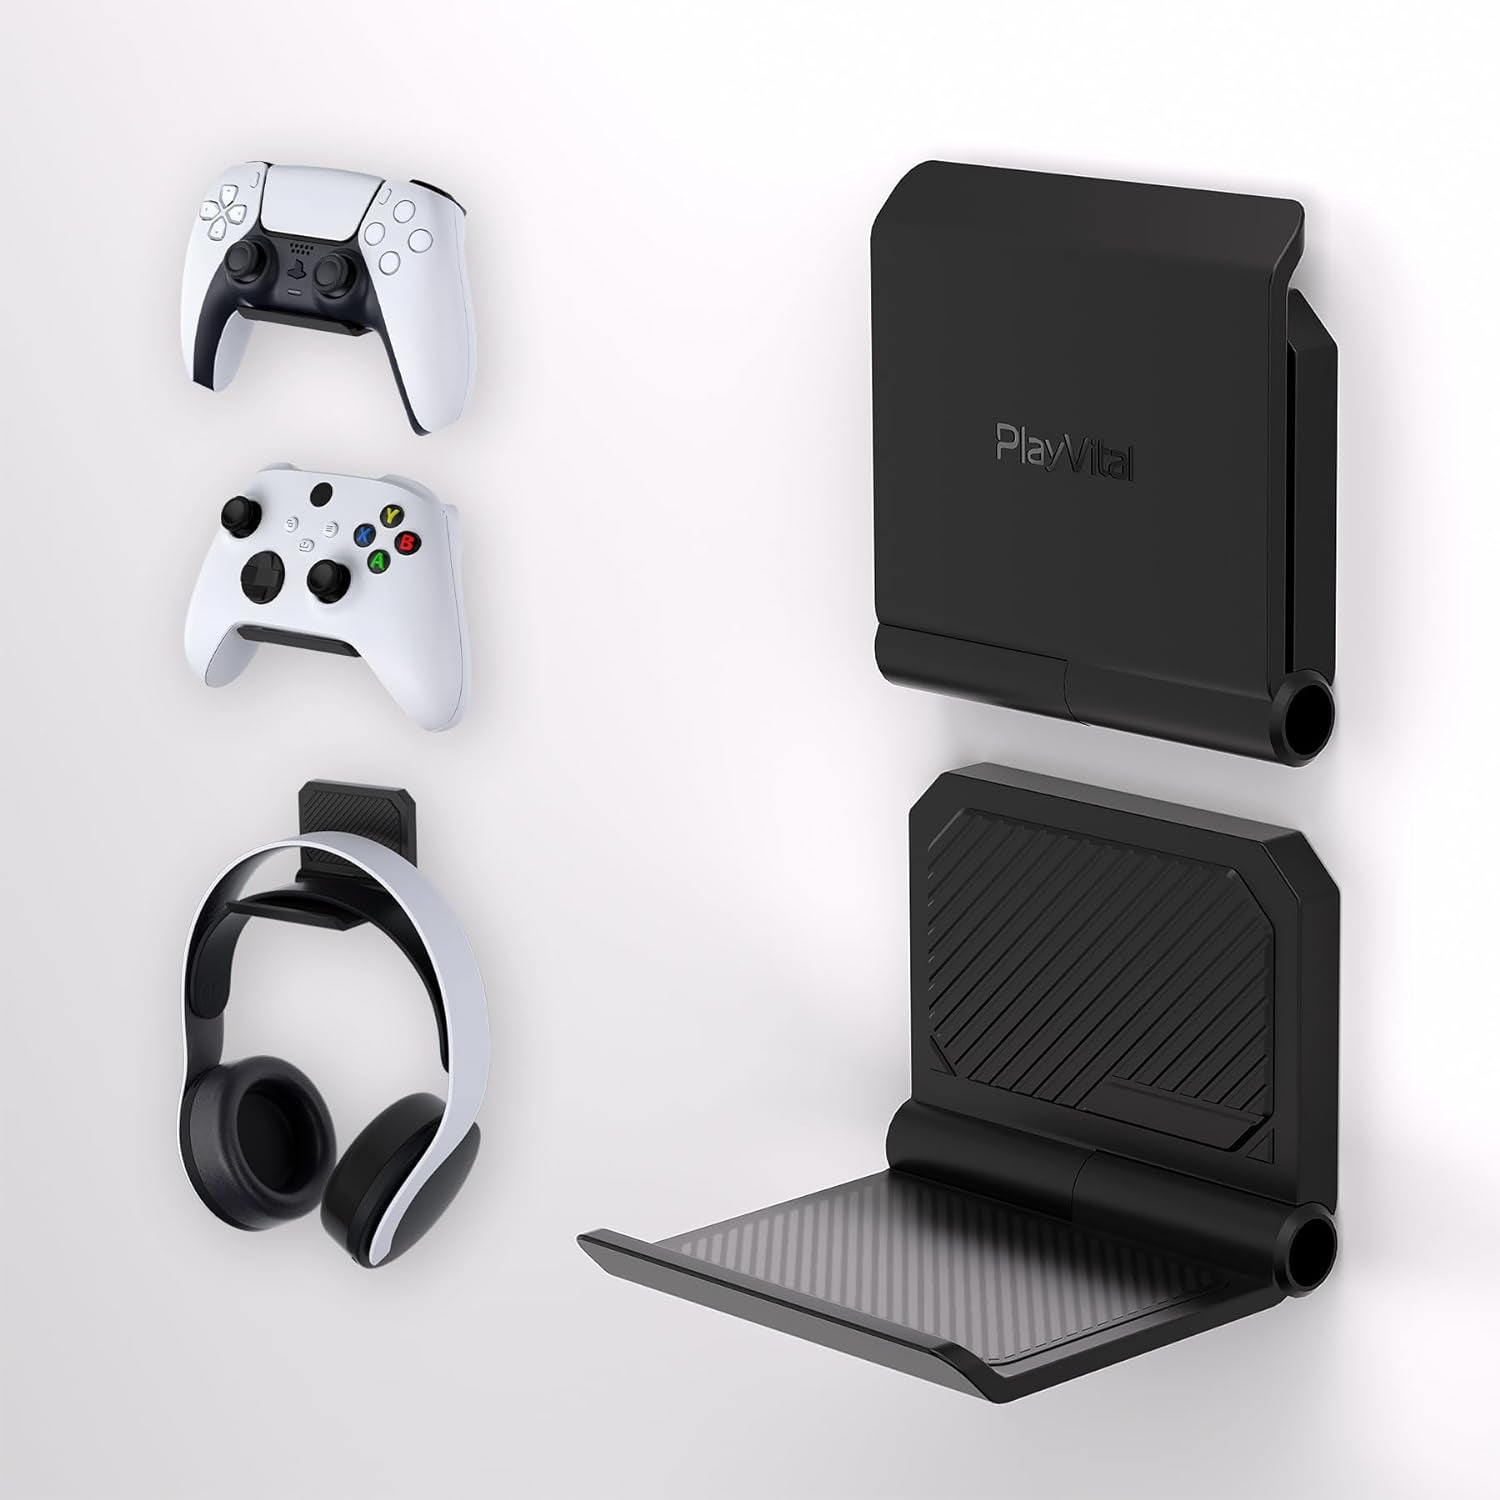 2 Set FOLD Controller Wall Mount for Ps5/4, Foldable Wall Stand for Xbox Series X/S, Switch Pro, Gaming Headset Stand, Wall Holder for Xbox Wireless Headset, for Pulse 3D Headset - Black